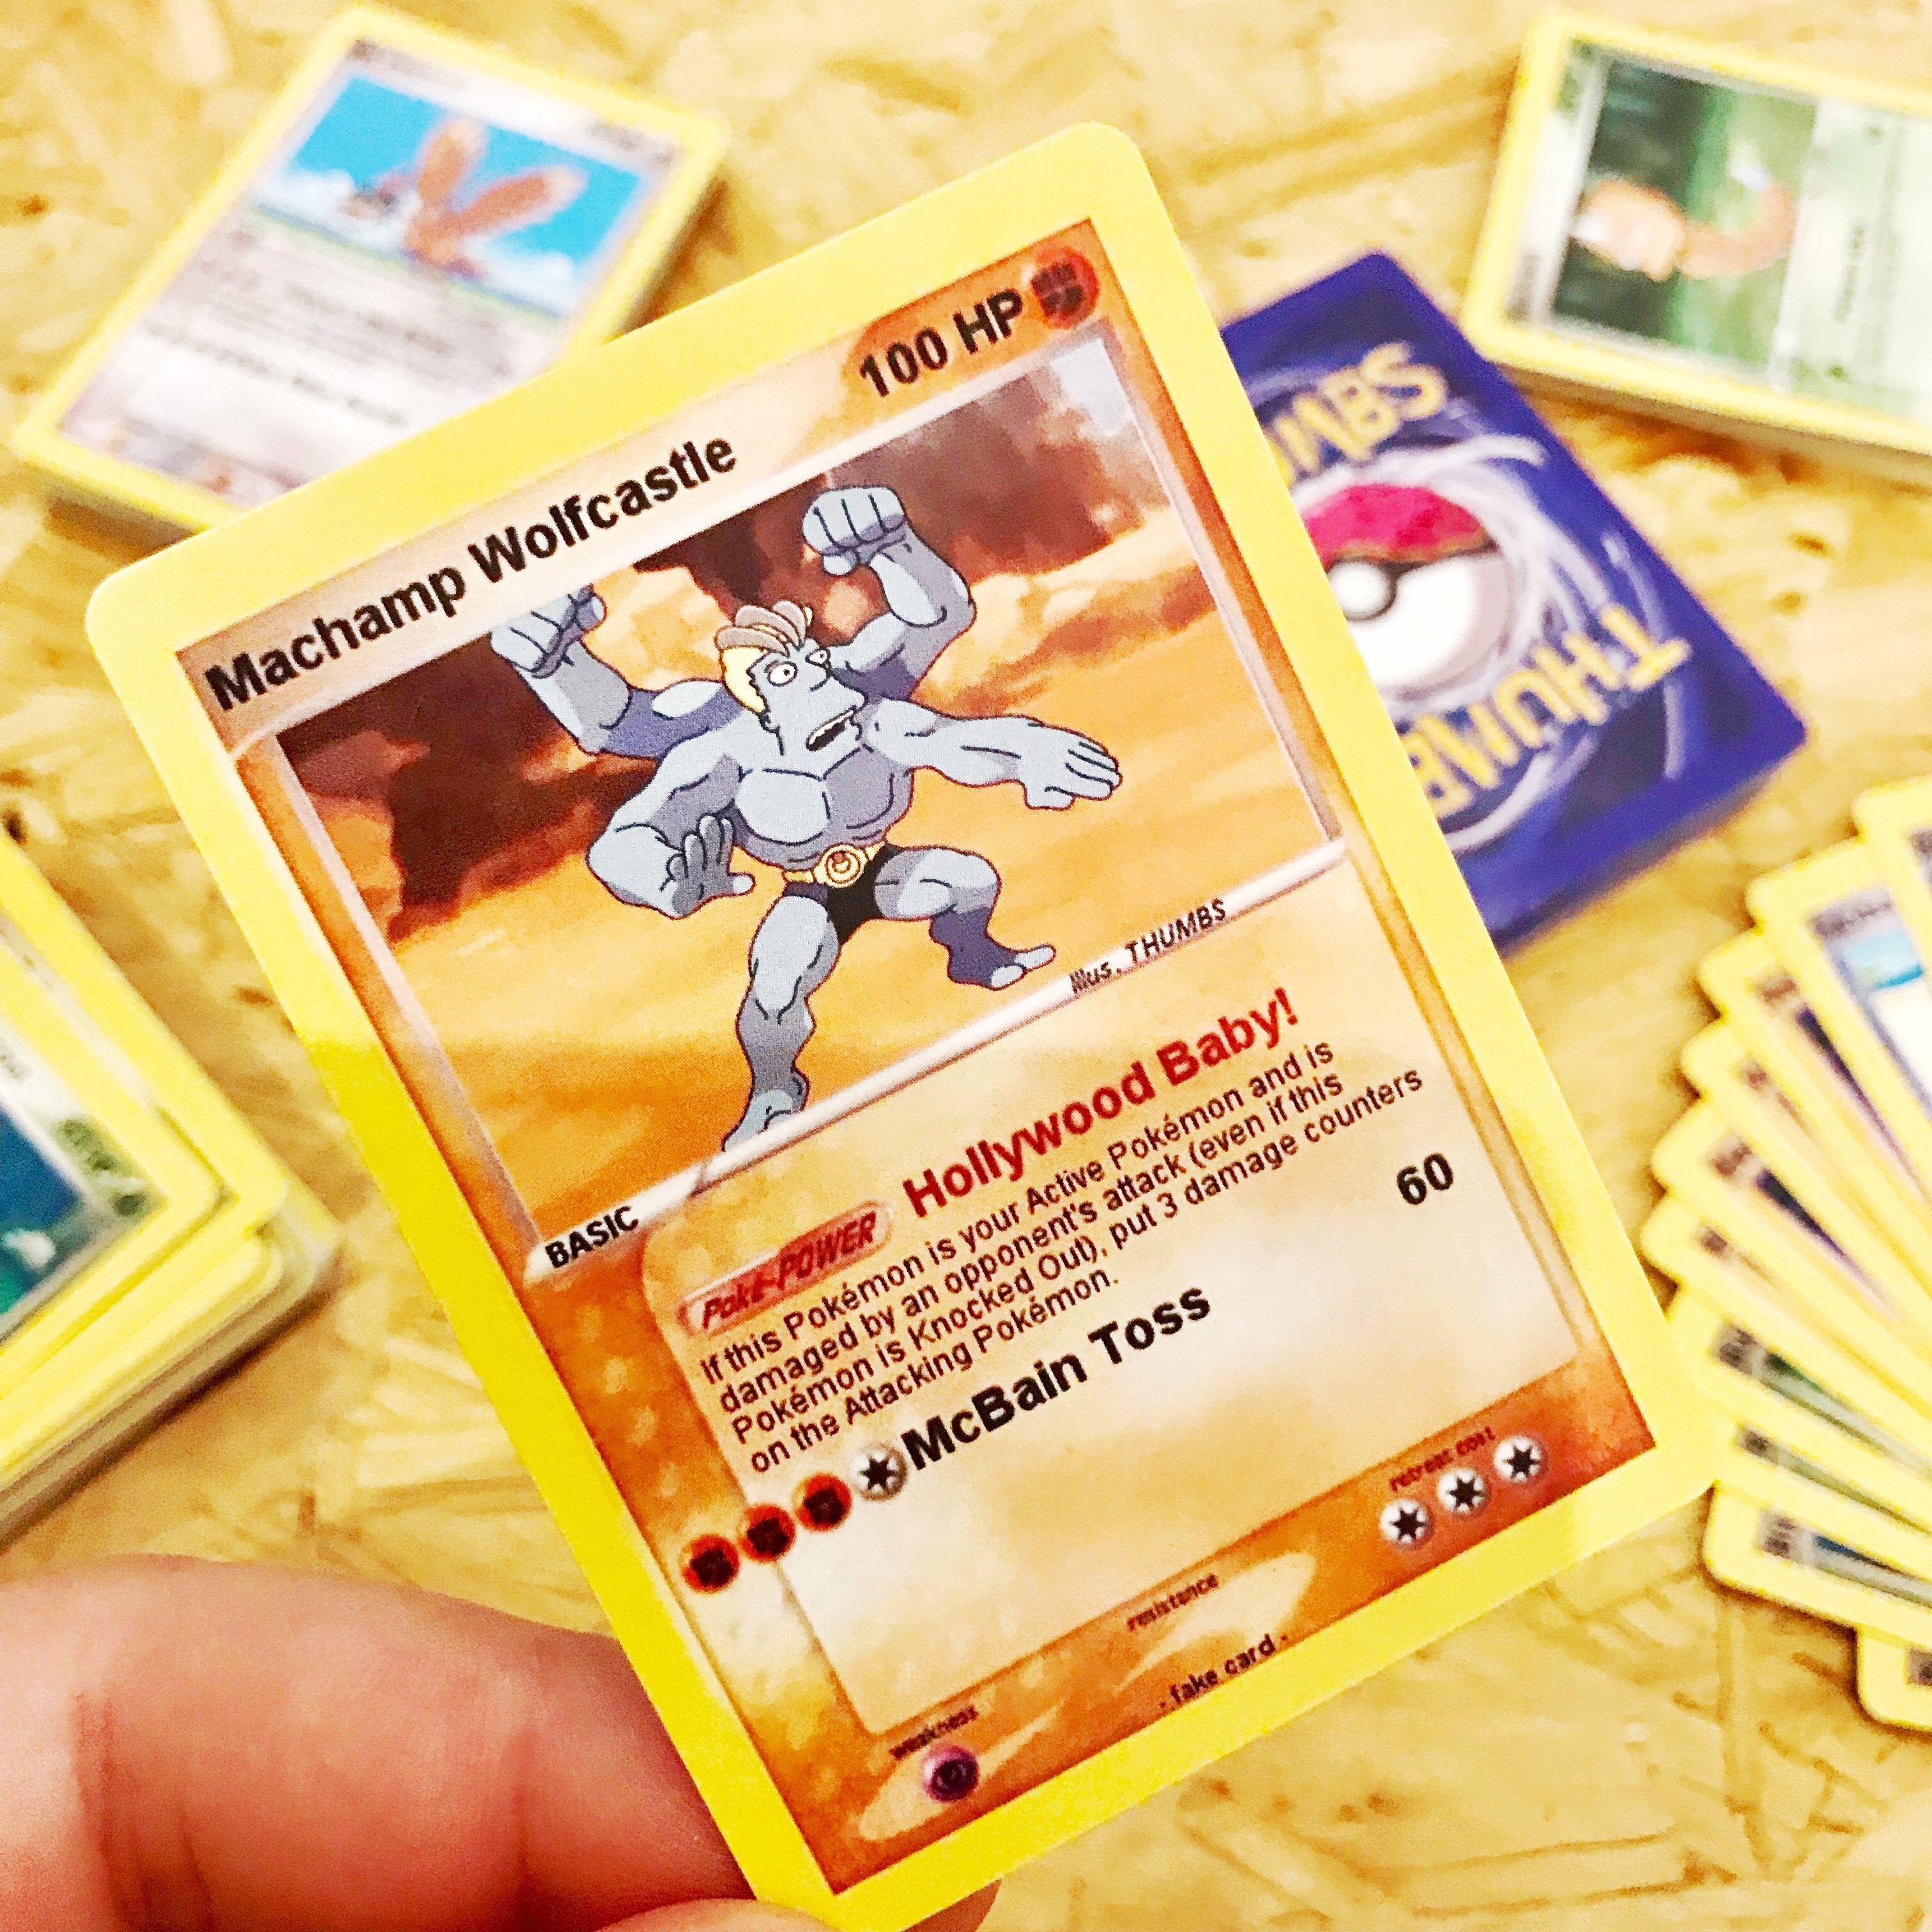 Machamp Wolfcastle Trading Card